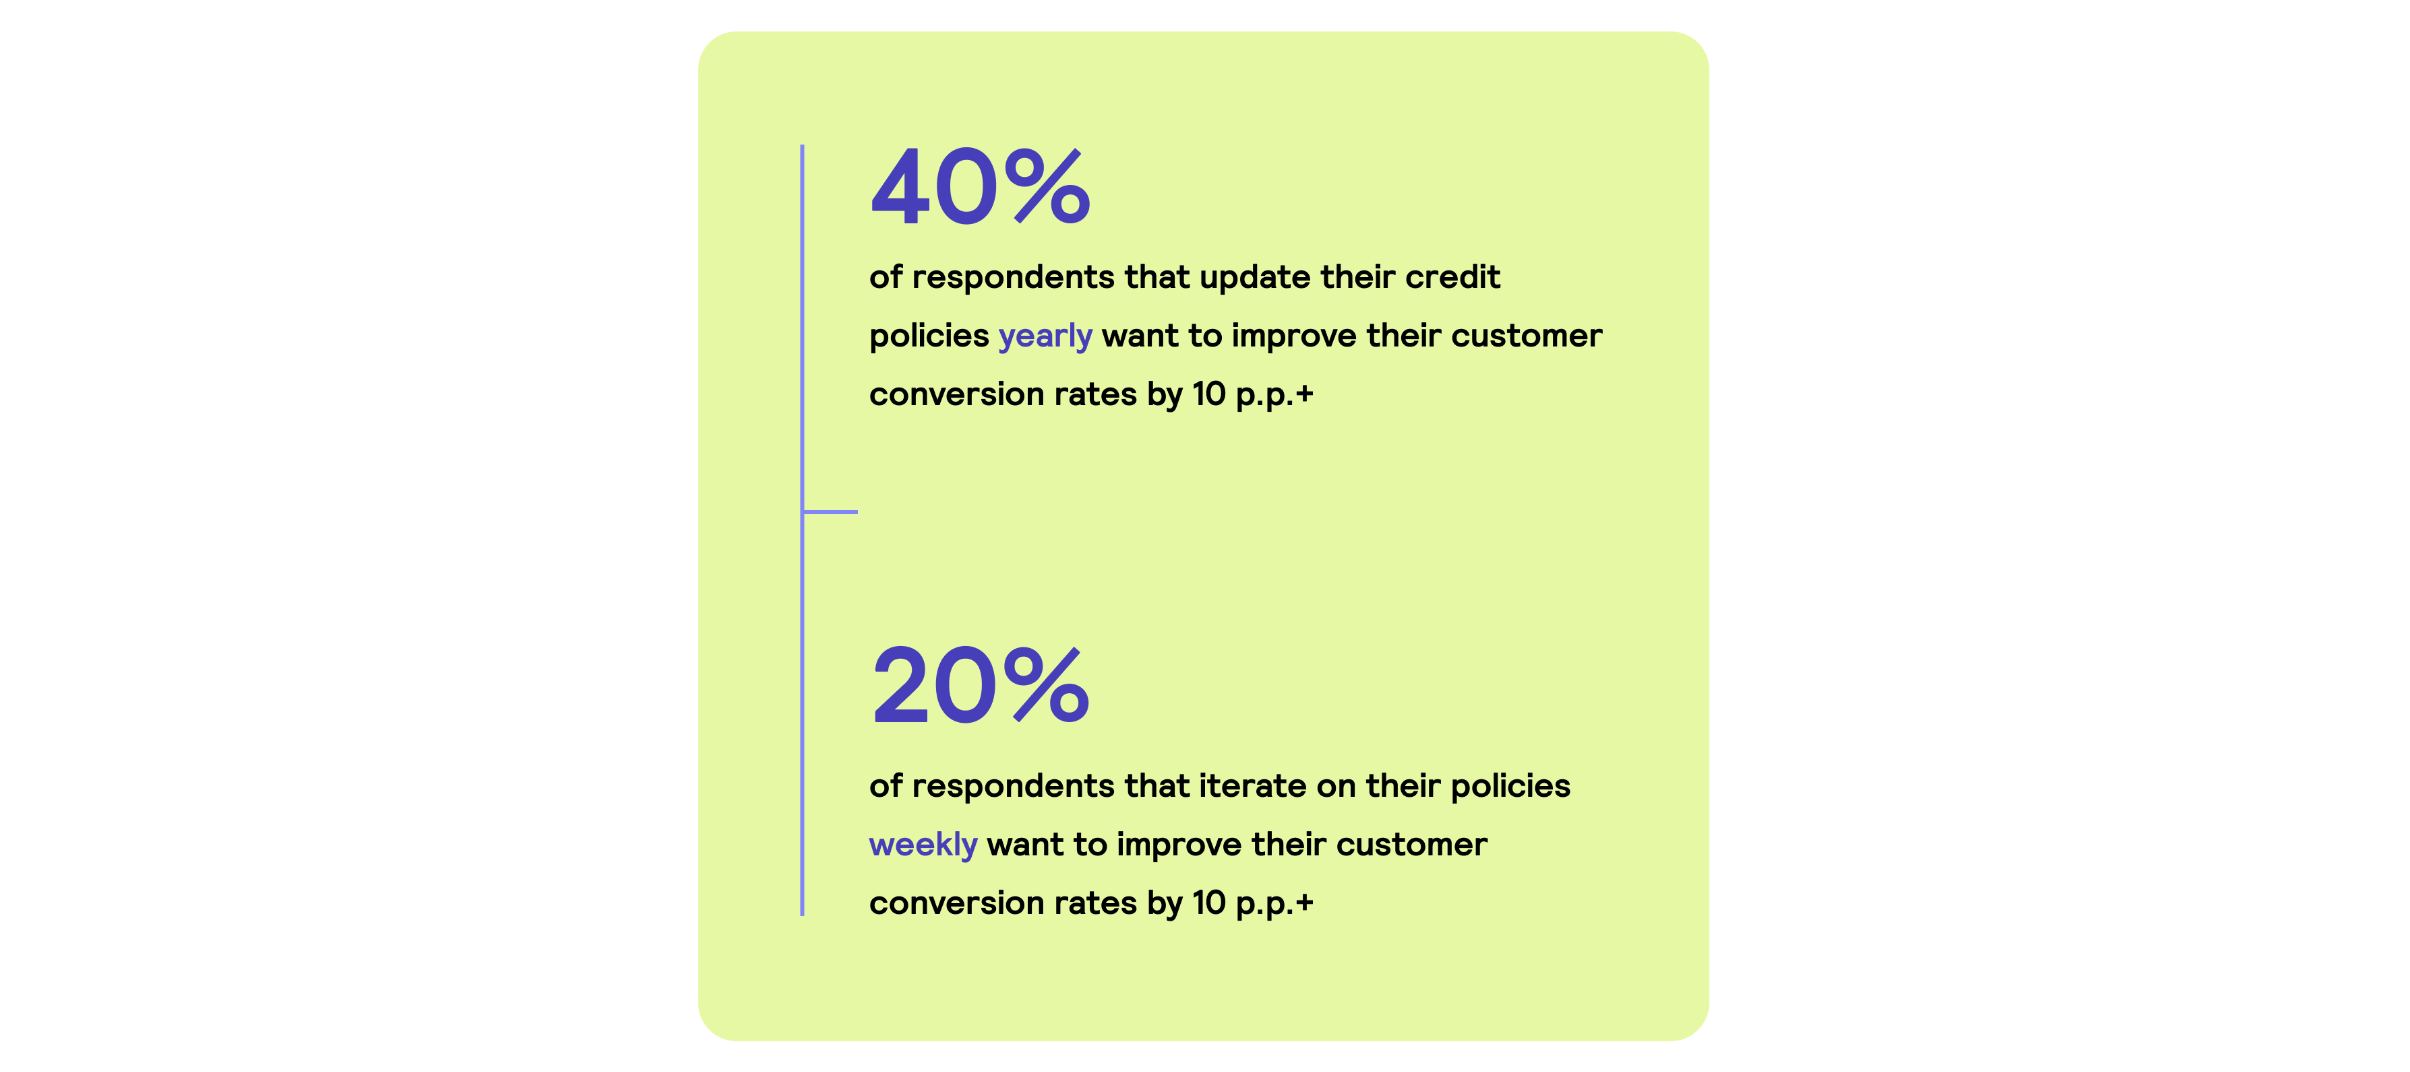 Faster credit policy iteration results in higher performance for lenders